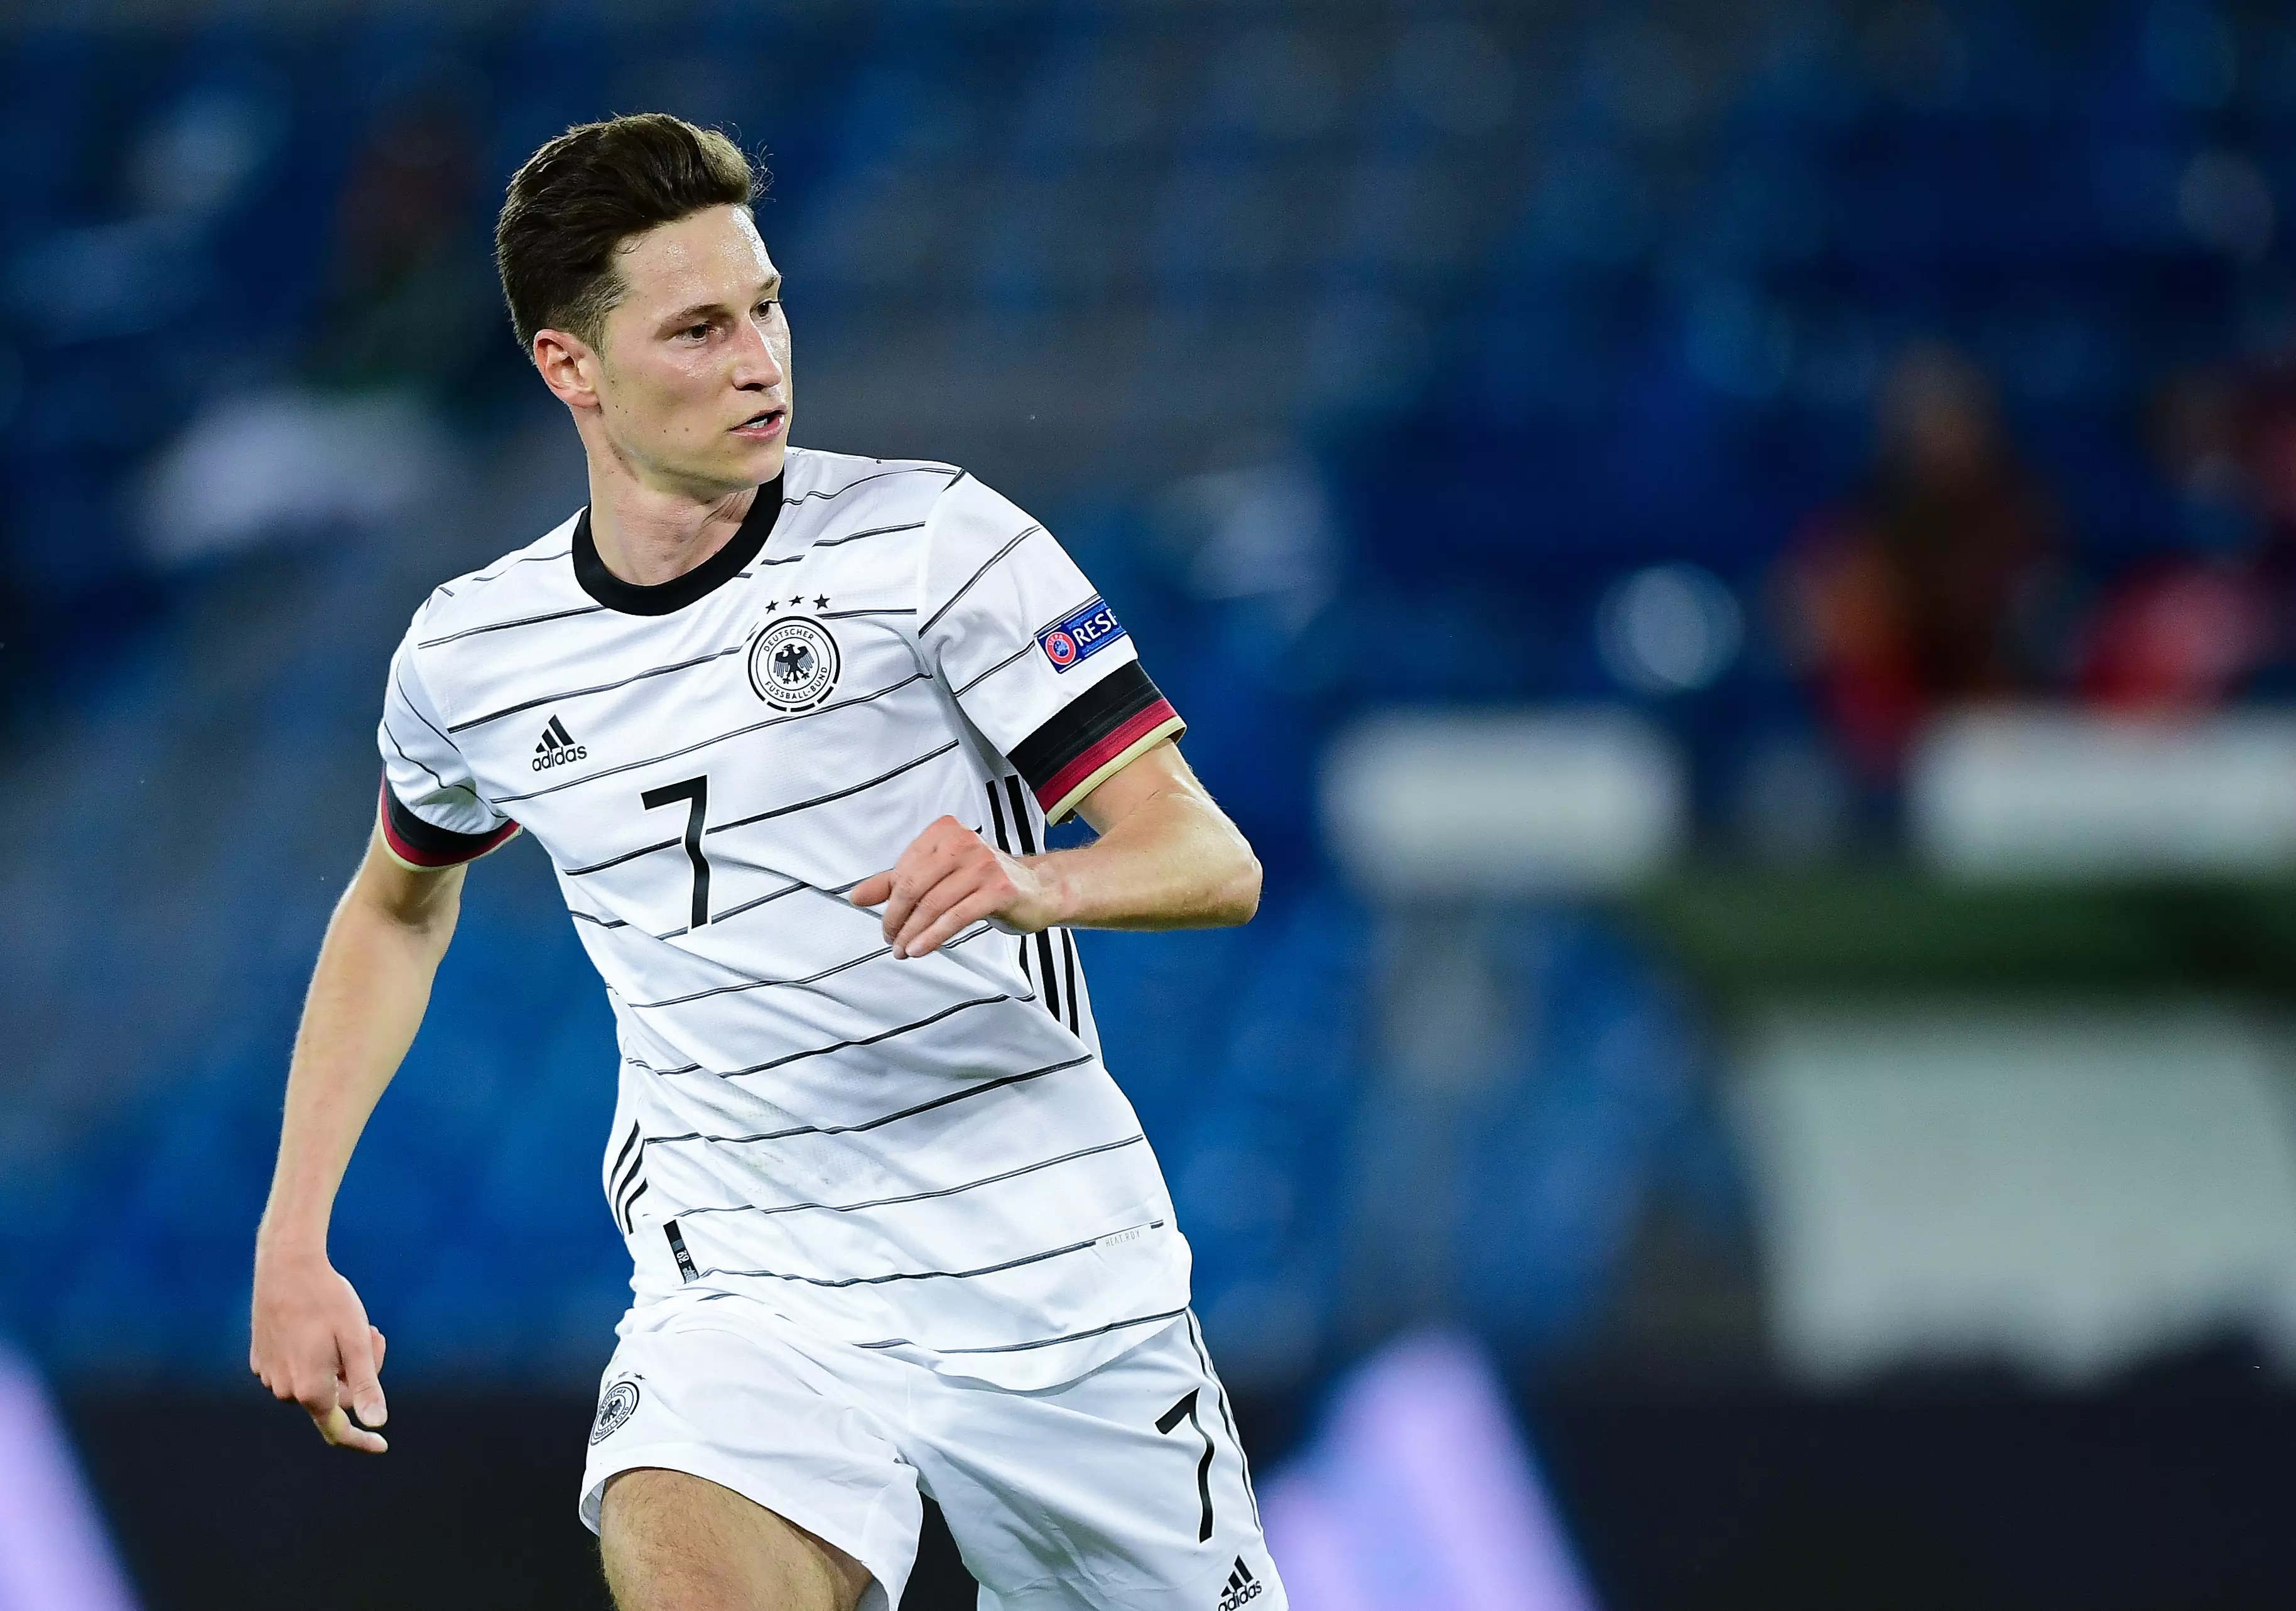 Draxler playing for Germany in the Nations League. Image: PA Images